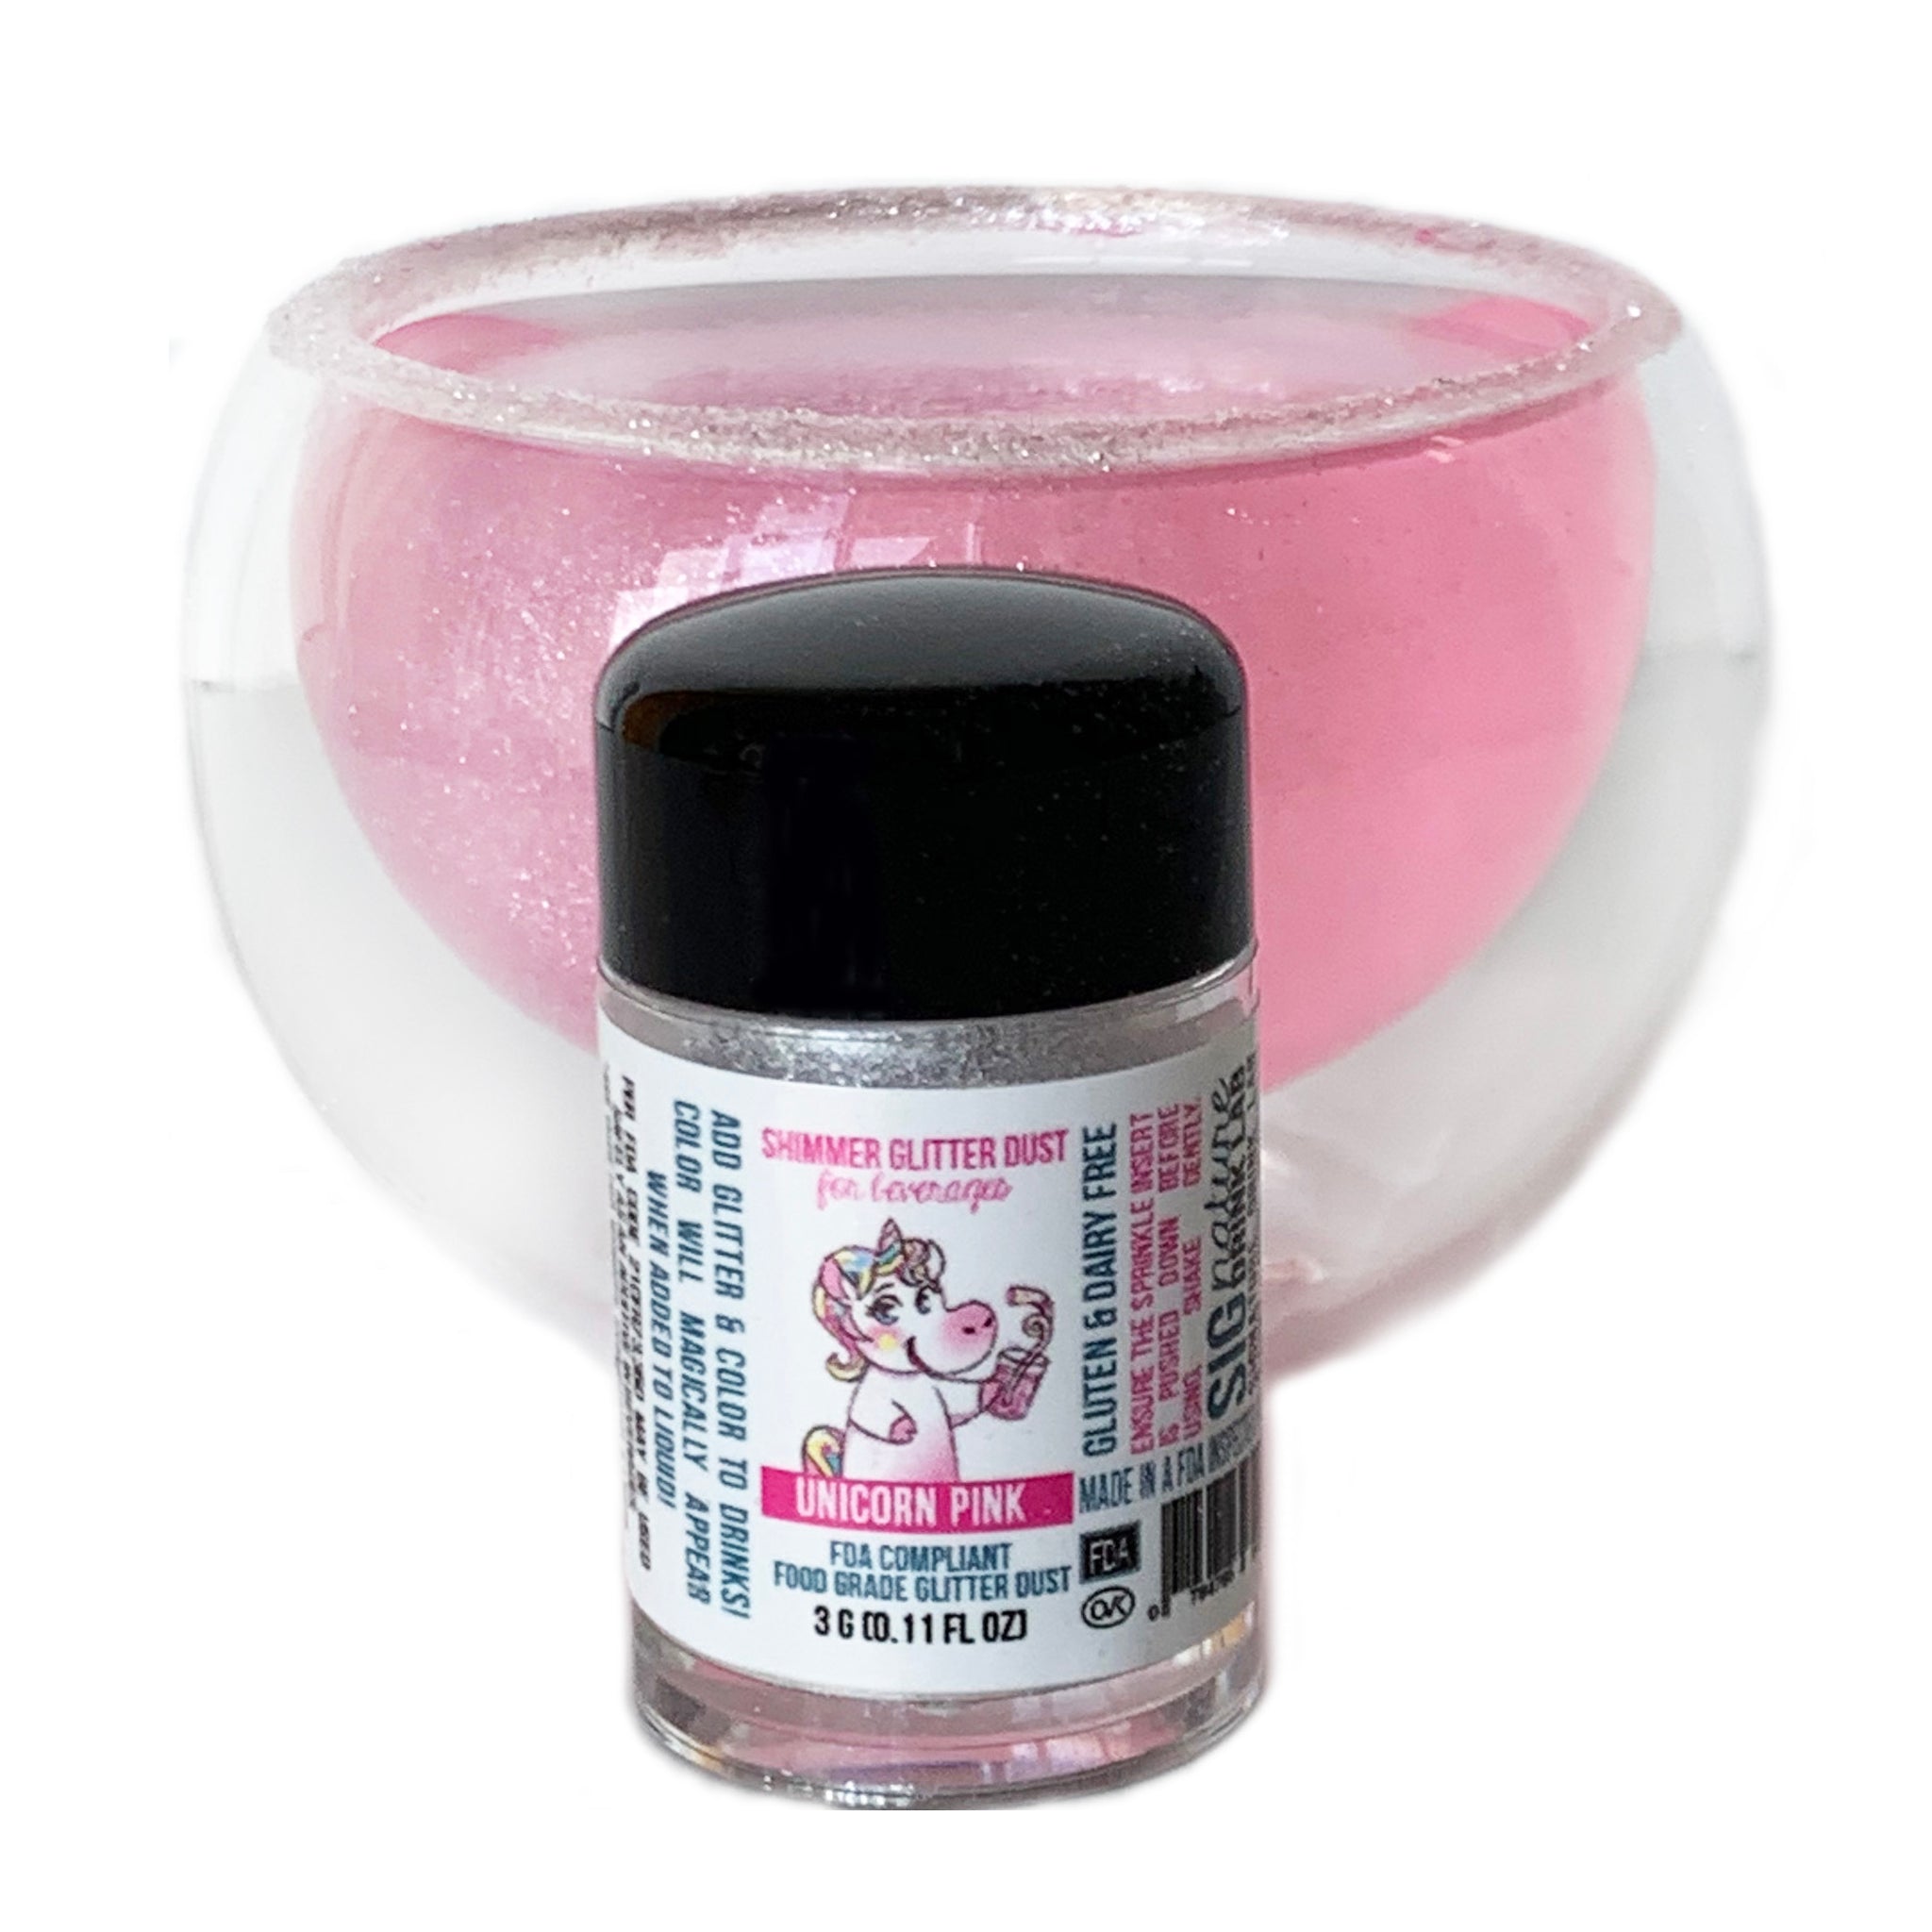 Barrel Roll Bar Essentials Pink Cocktail Glitter - Sparkly Edible Glitter  for Drinks – Pink Glitter Drink Dust for Mixed Drinks, Champagne, Beer 